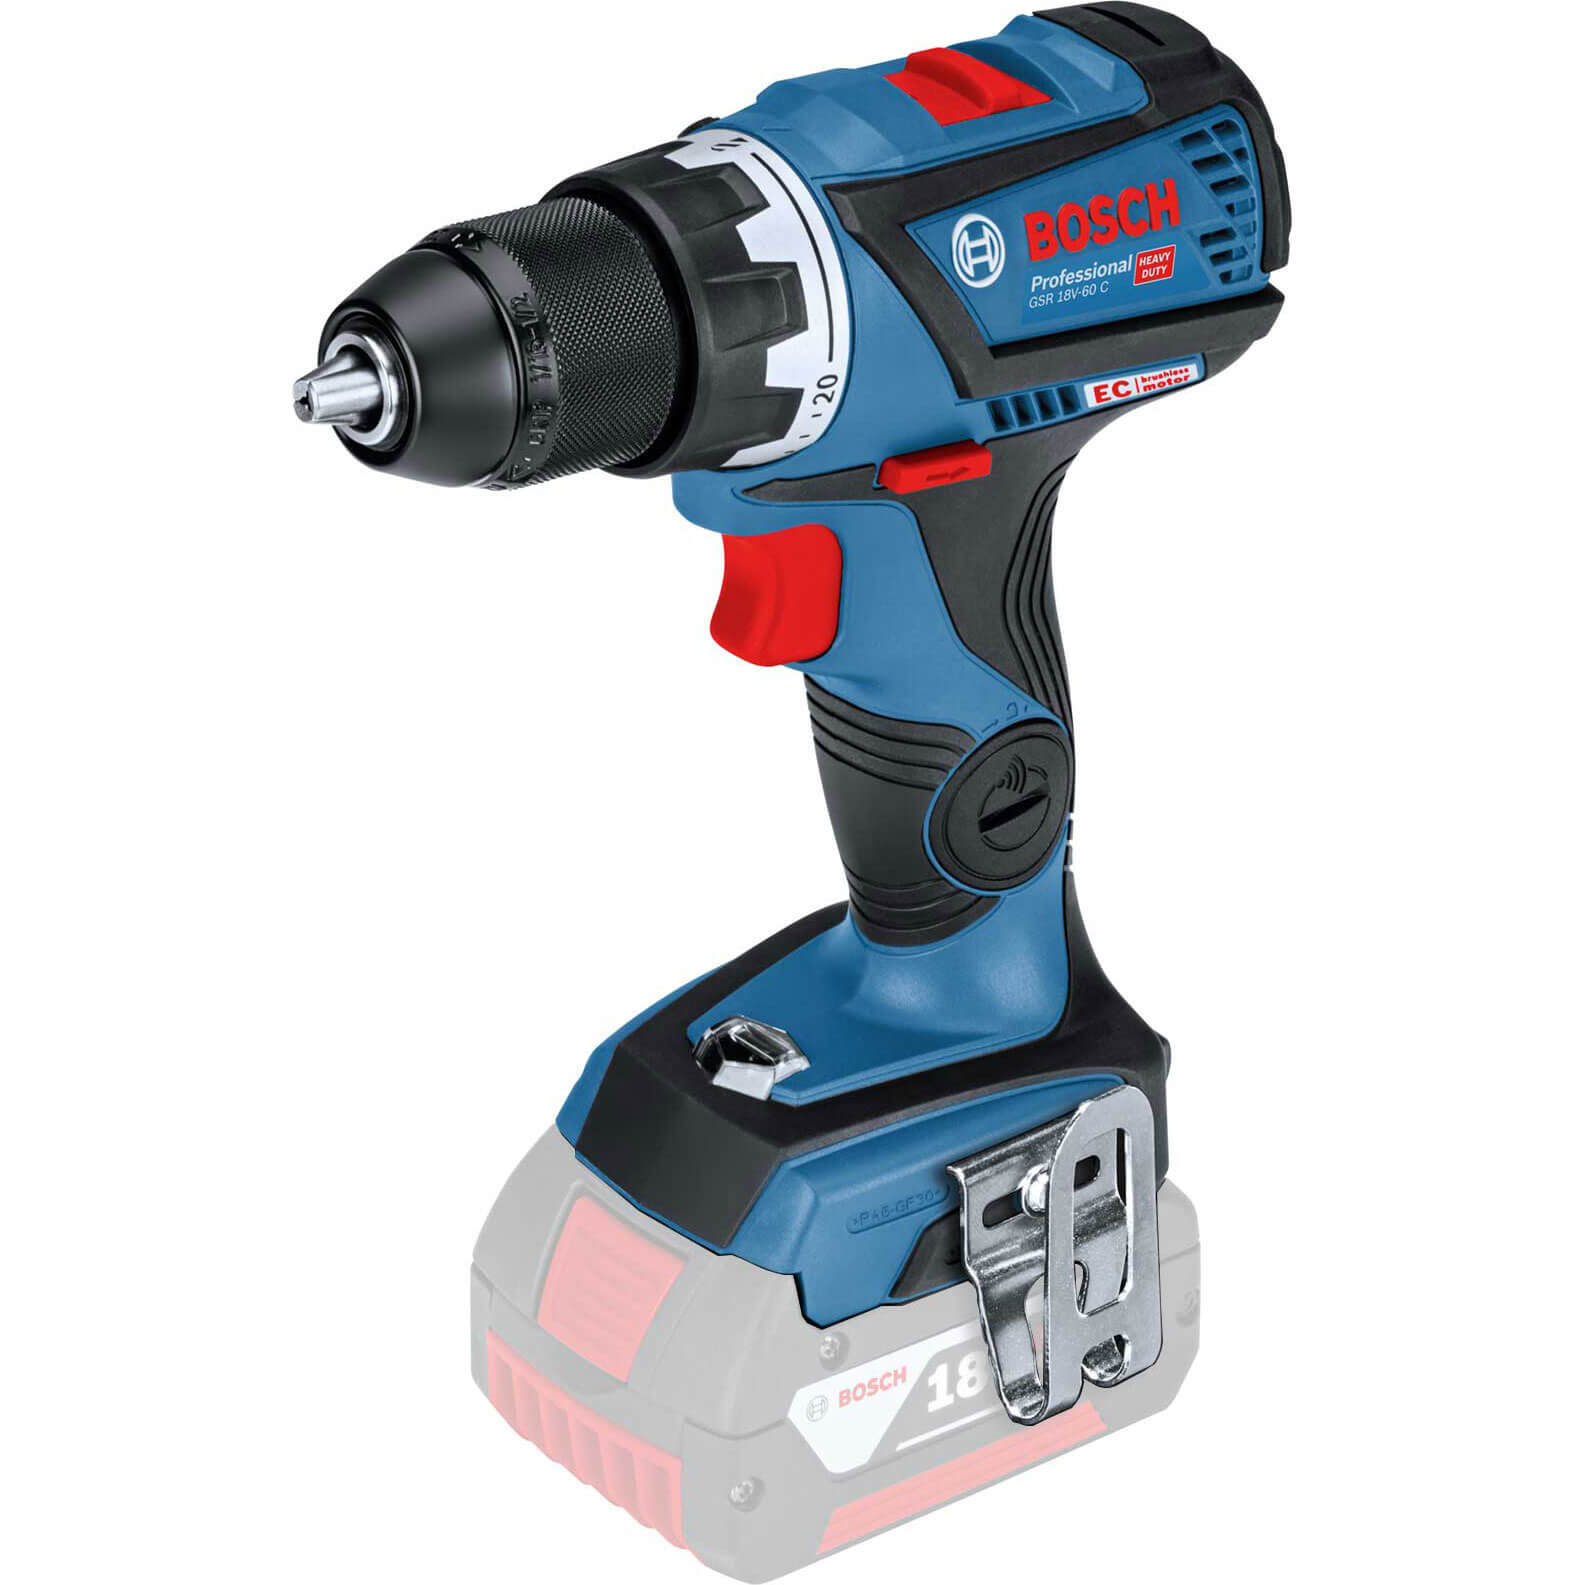 Image of Bosch GSR 18 V-60 C 18v Cordless Connect Ready Drill Driver No Batteries No Charger Case